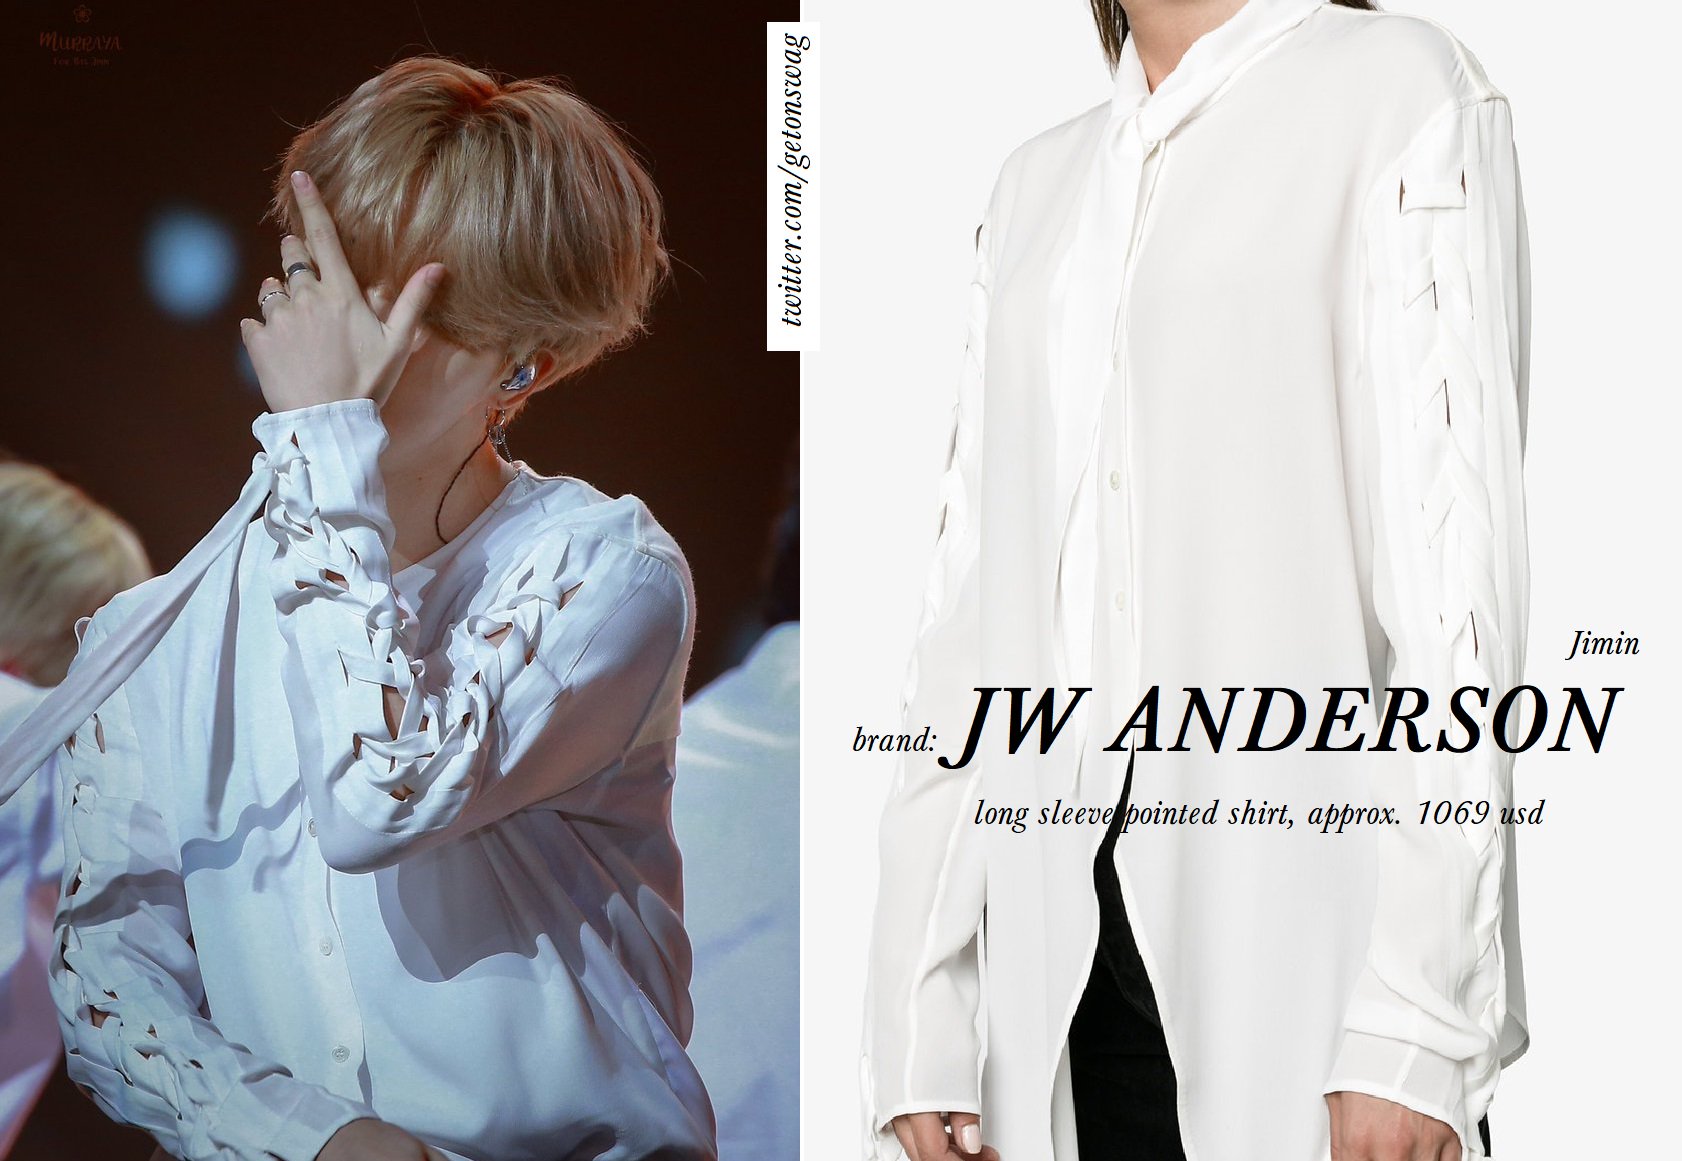 Beyond The Style ✼ Alex ✼ on X: JIMIN #JIMIN 171108 G.C.F in